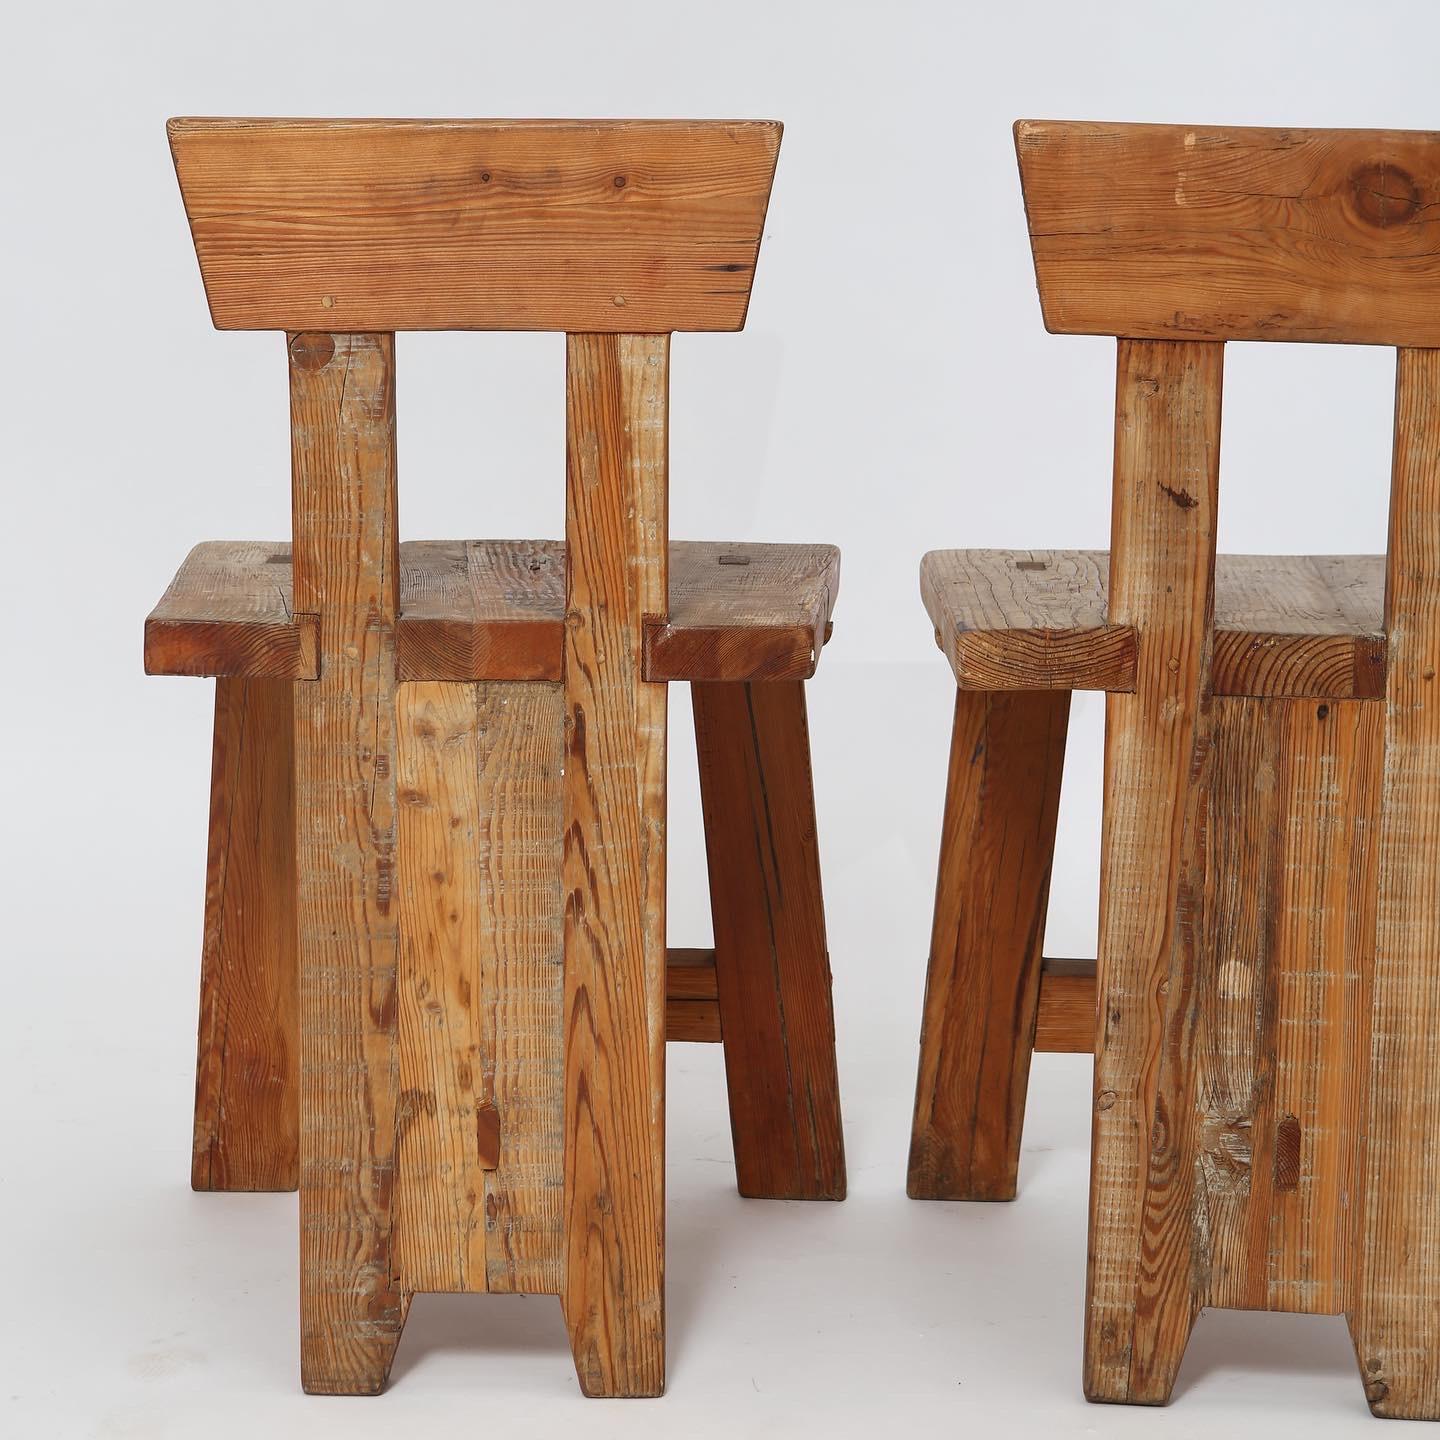 Pair folk modernist pine chairs. From a school in China circa 1970s. Solid build, fantastic lines. Nice patina.